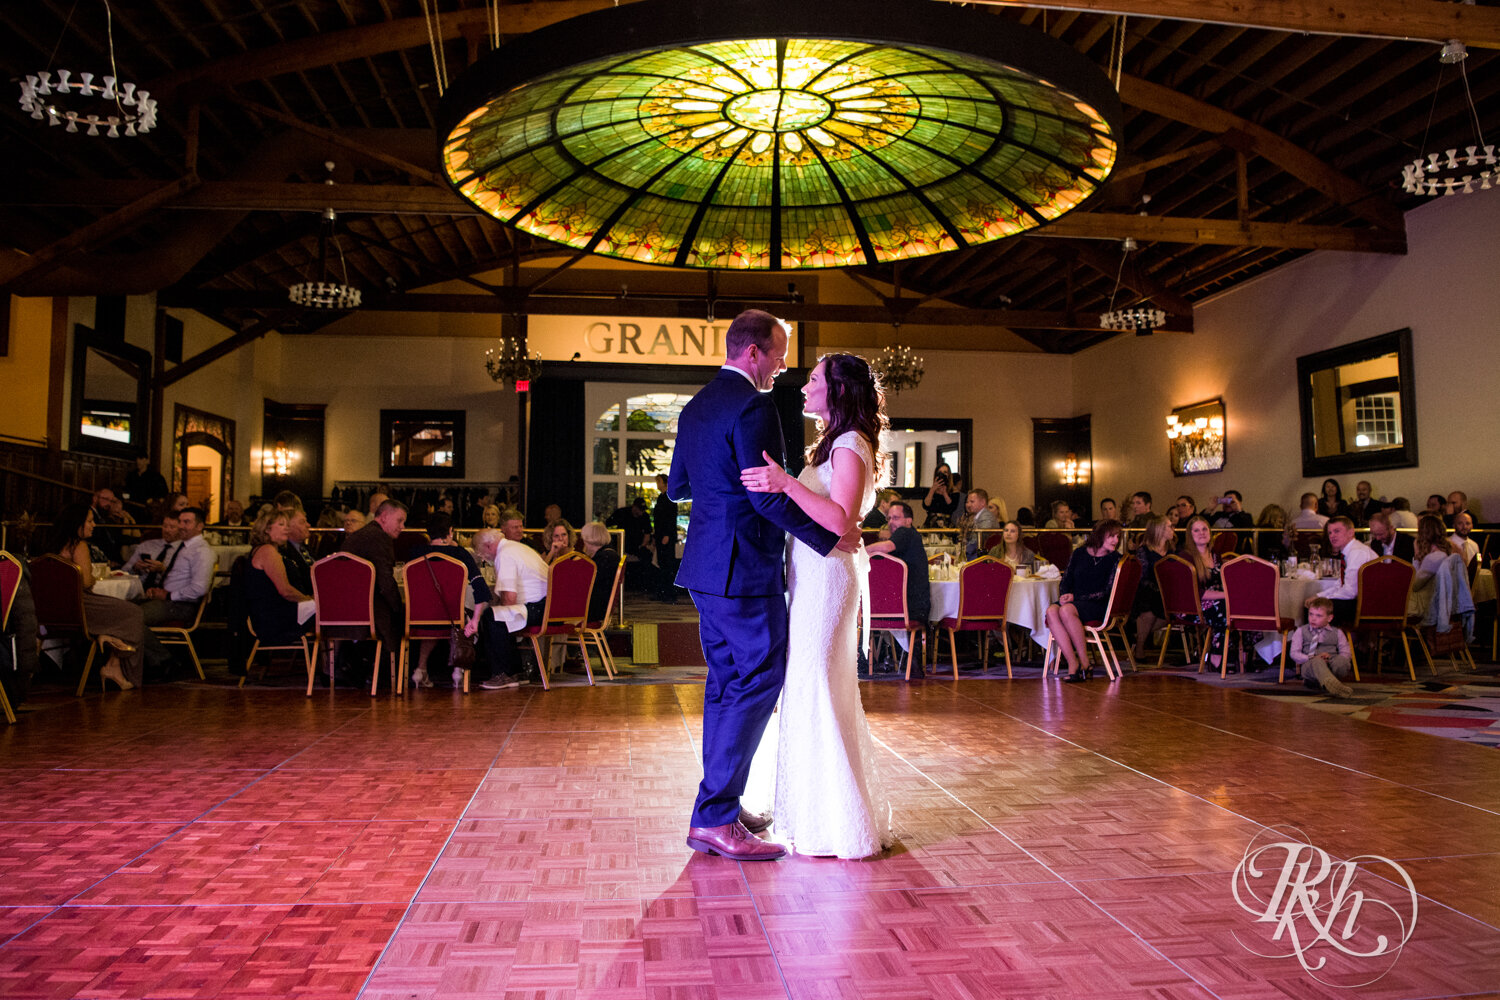 Bride and groom smile during first dance at Grand Banquet Hall in Stillwater, Minnesota.